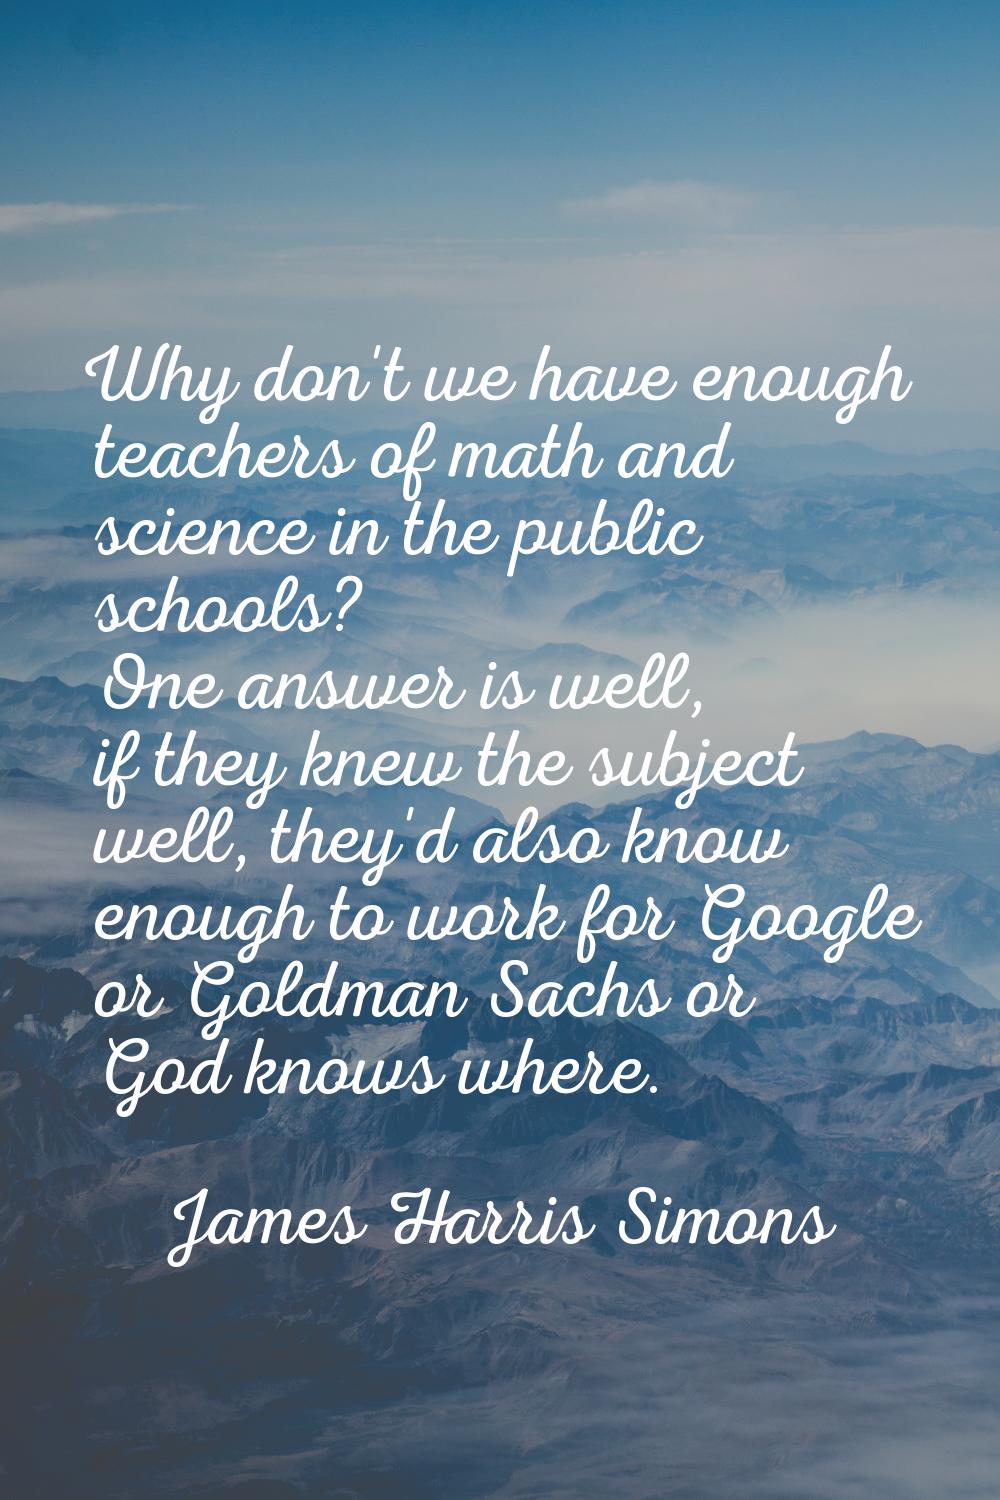 Why don't we have enough teachers of math and science in the public schools? One answer is well, if